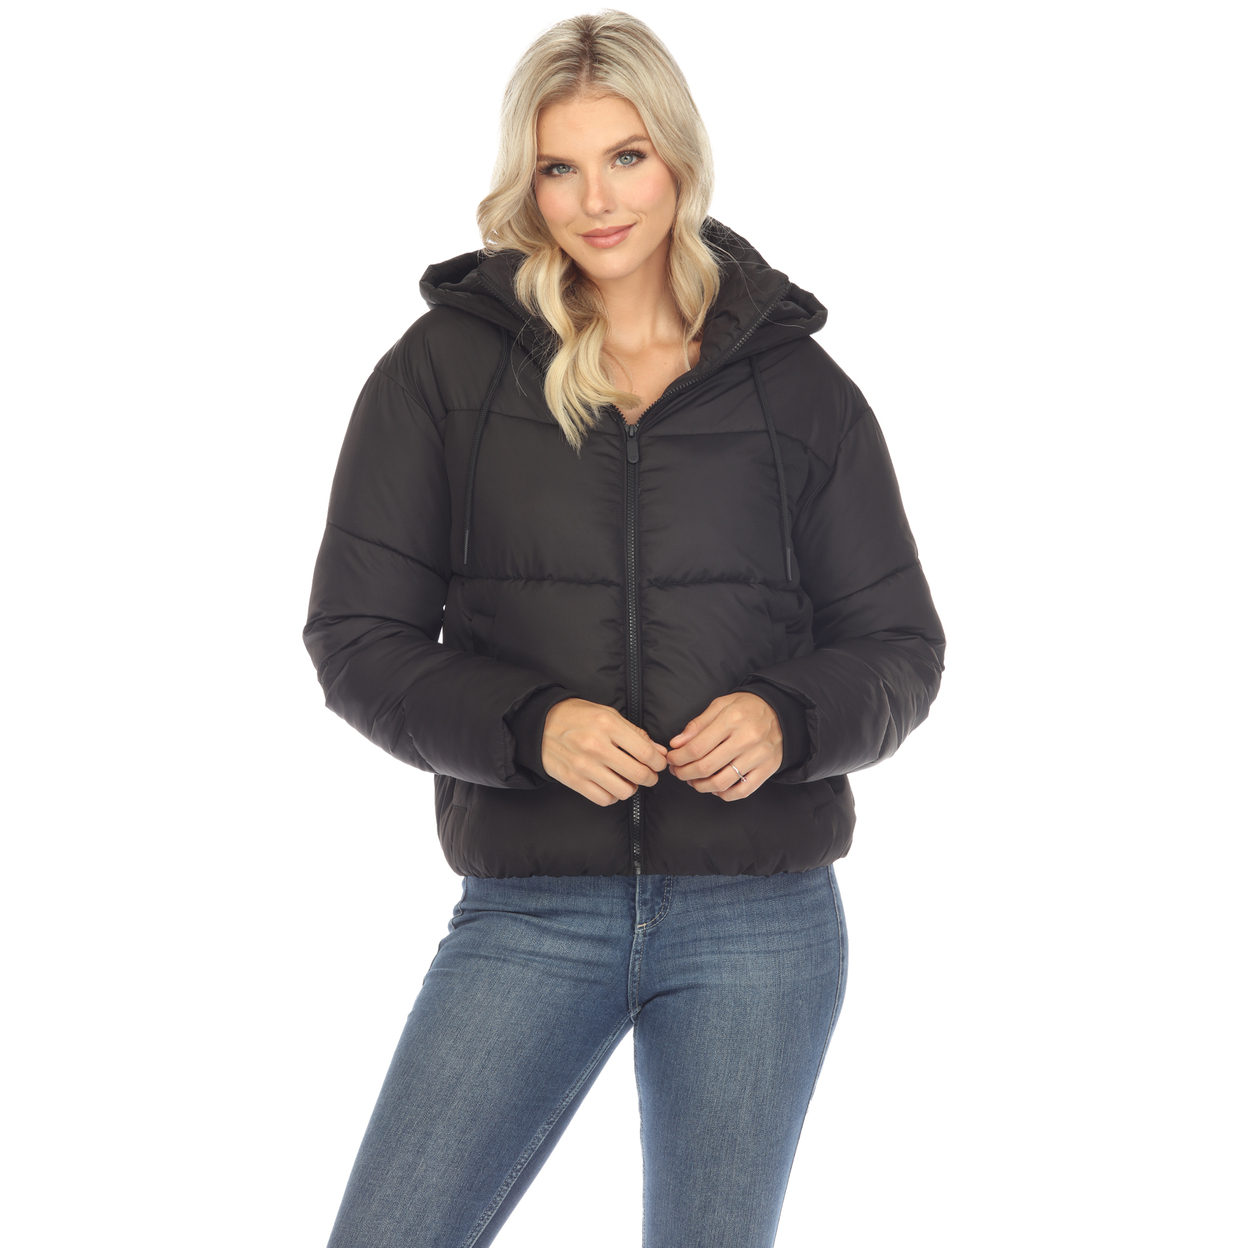 White Mark Women's Zip Hooded Puffer Jacket With Pockets - Black, X-large